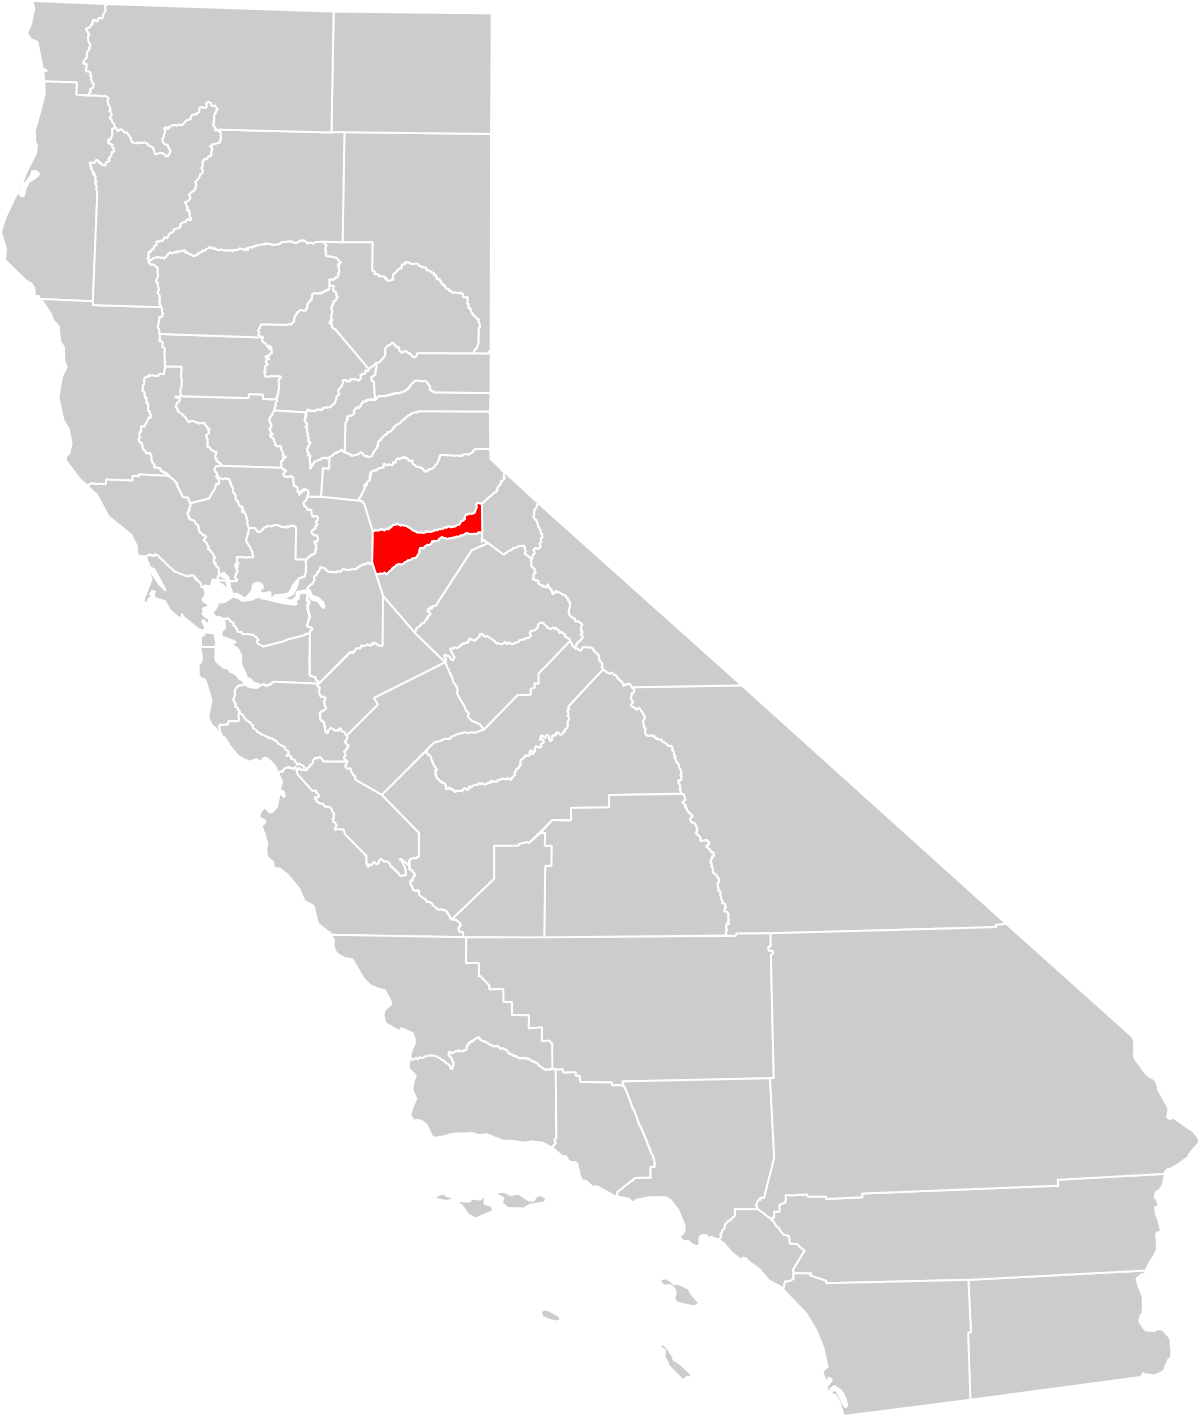 File:California county map (Amador County highlighted).svg - Wikimedia  Commons